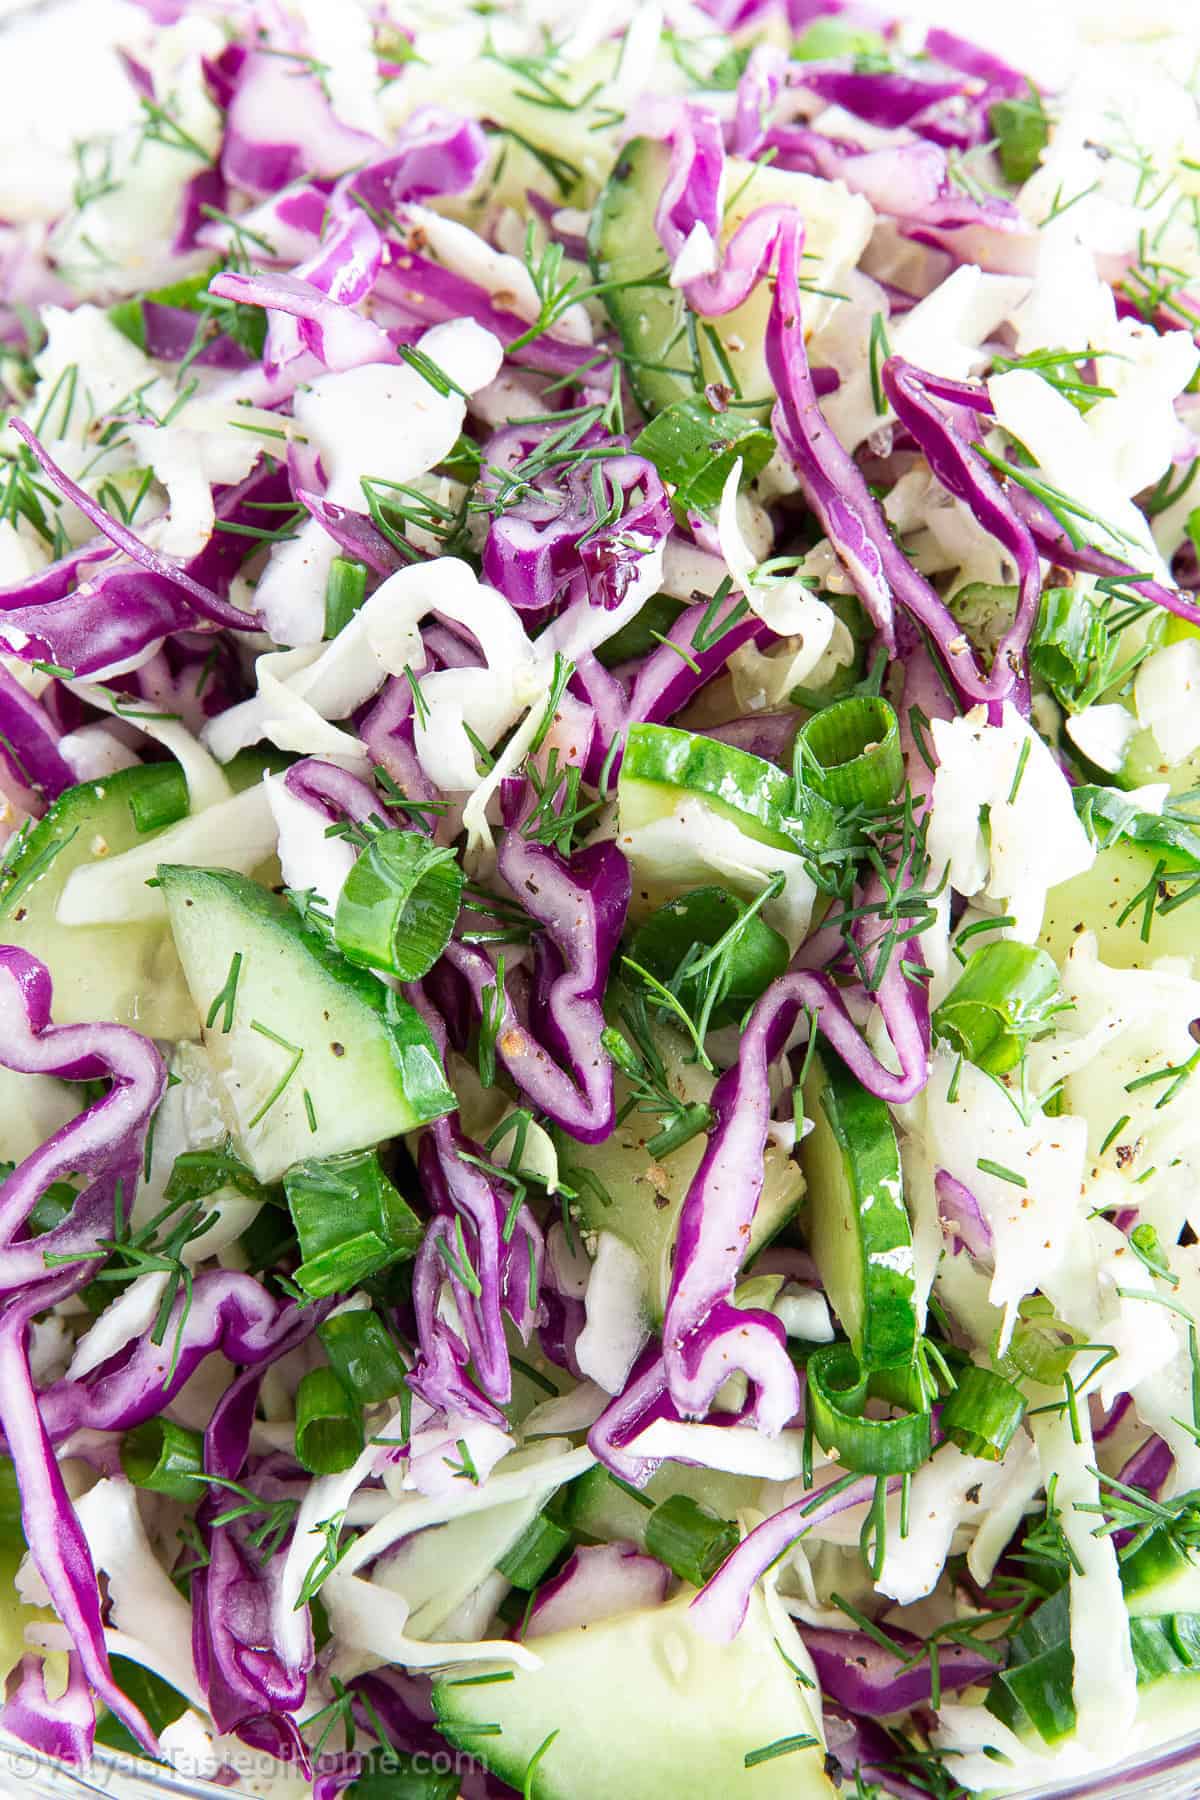 The fresh crunchy vegetables coated with homemade olive oil sauce dressing pairs so well together. Green onions elevate this salad to the next level. 